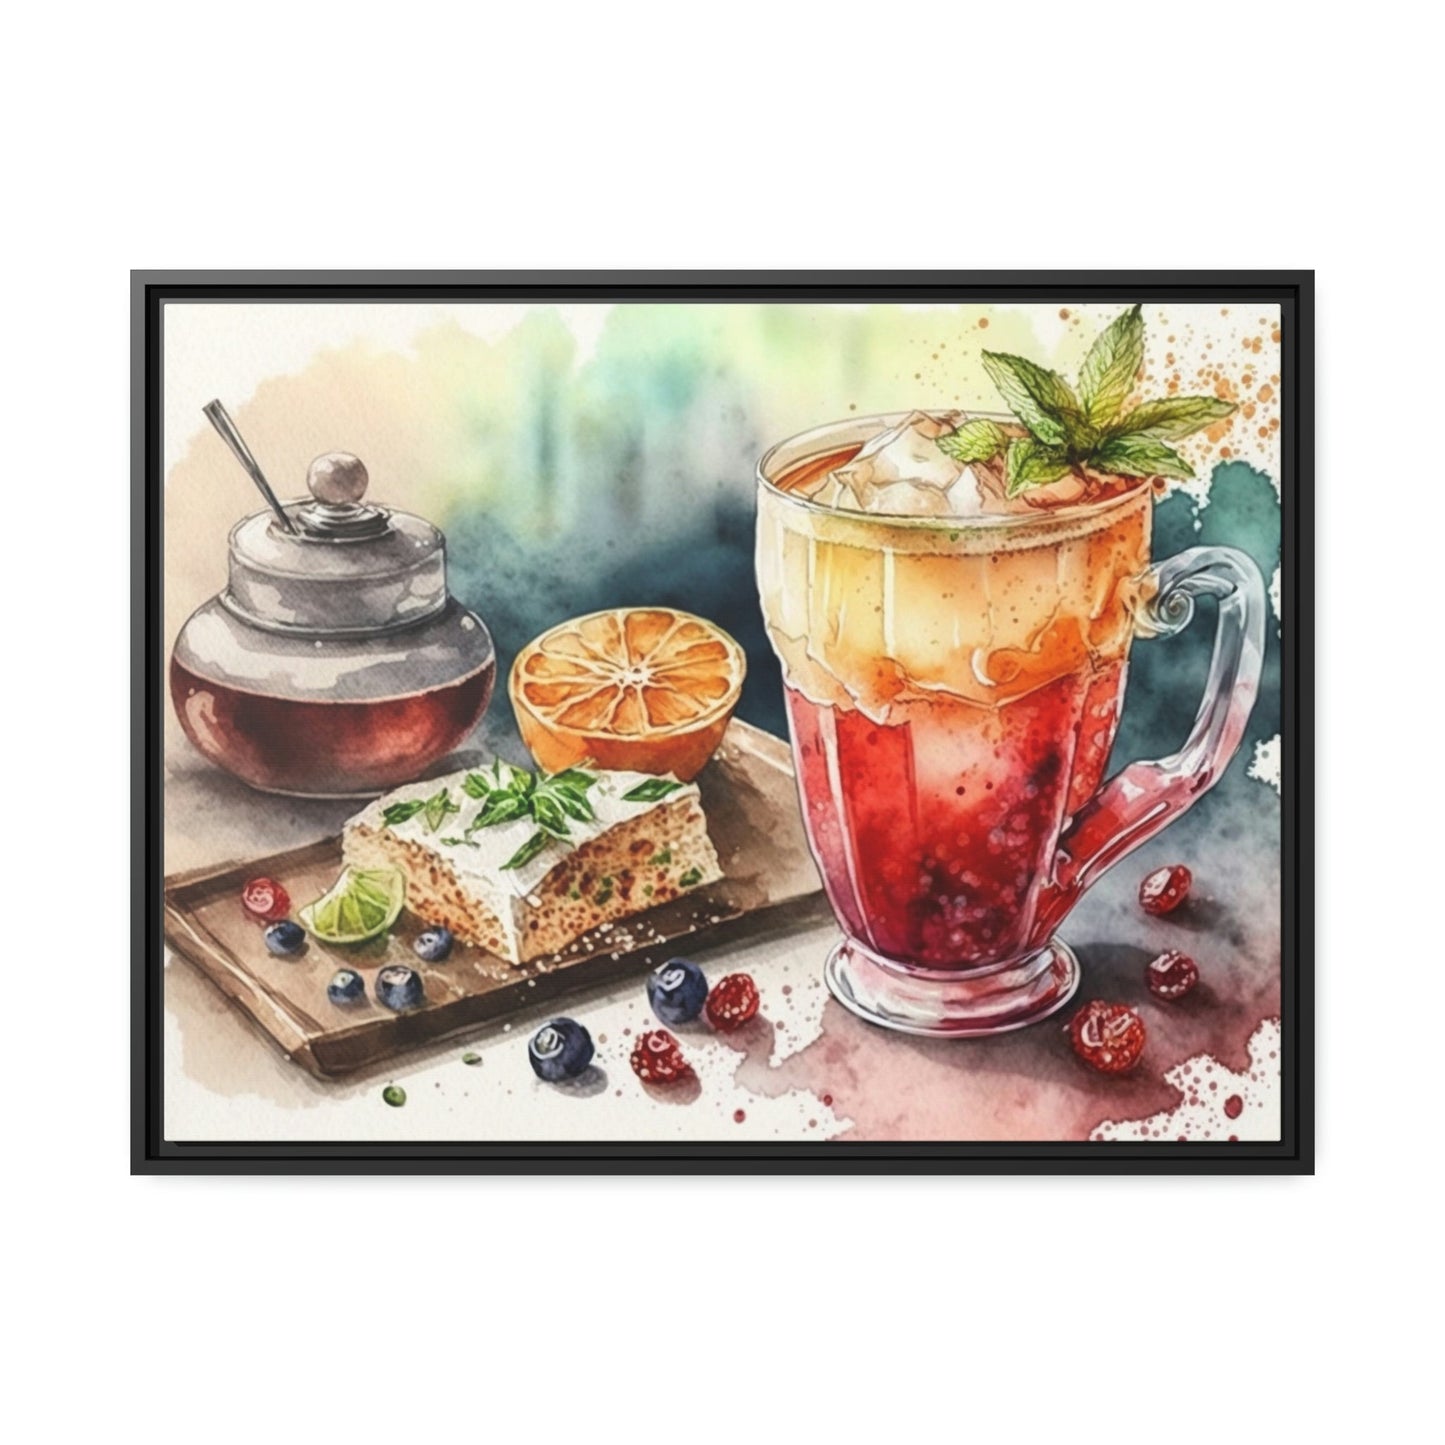 Food & Drink: Vibrant Framed Posters to Liven Up Your Space